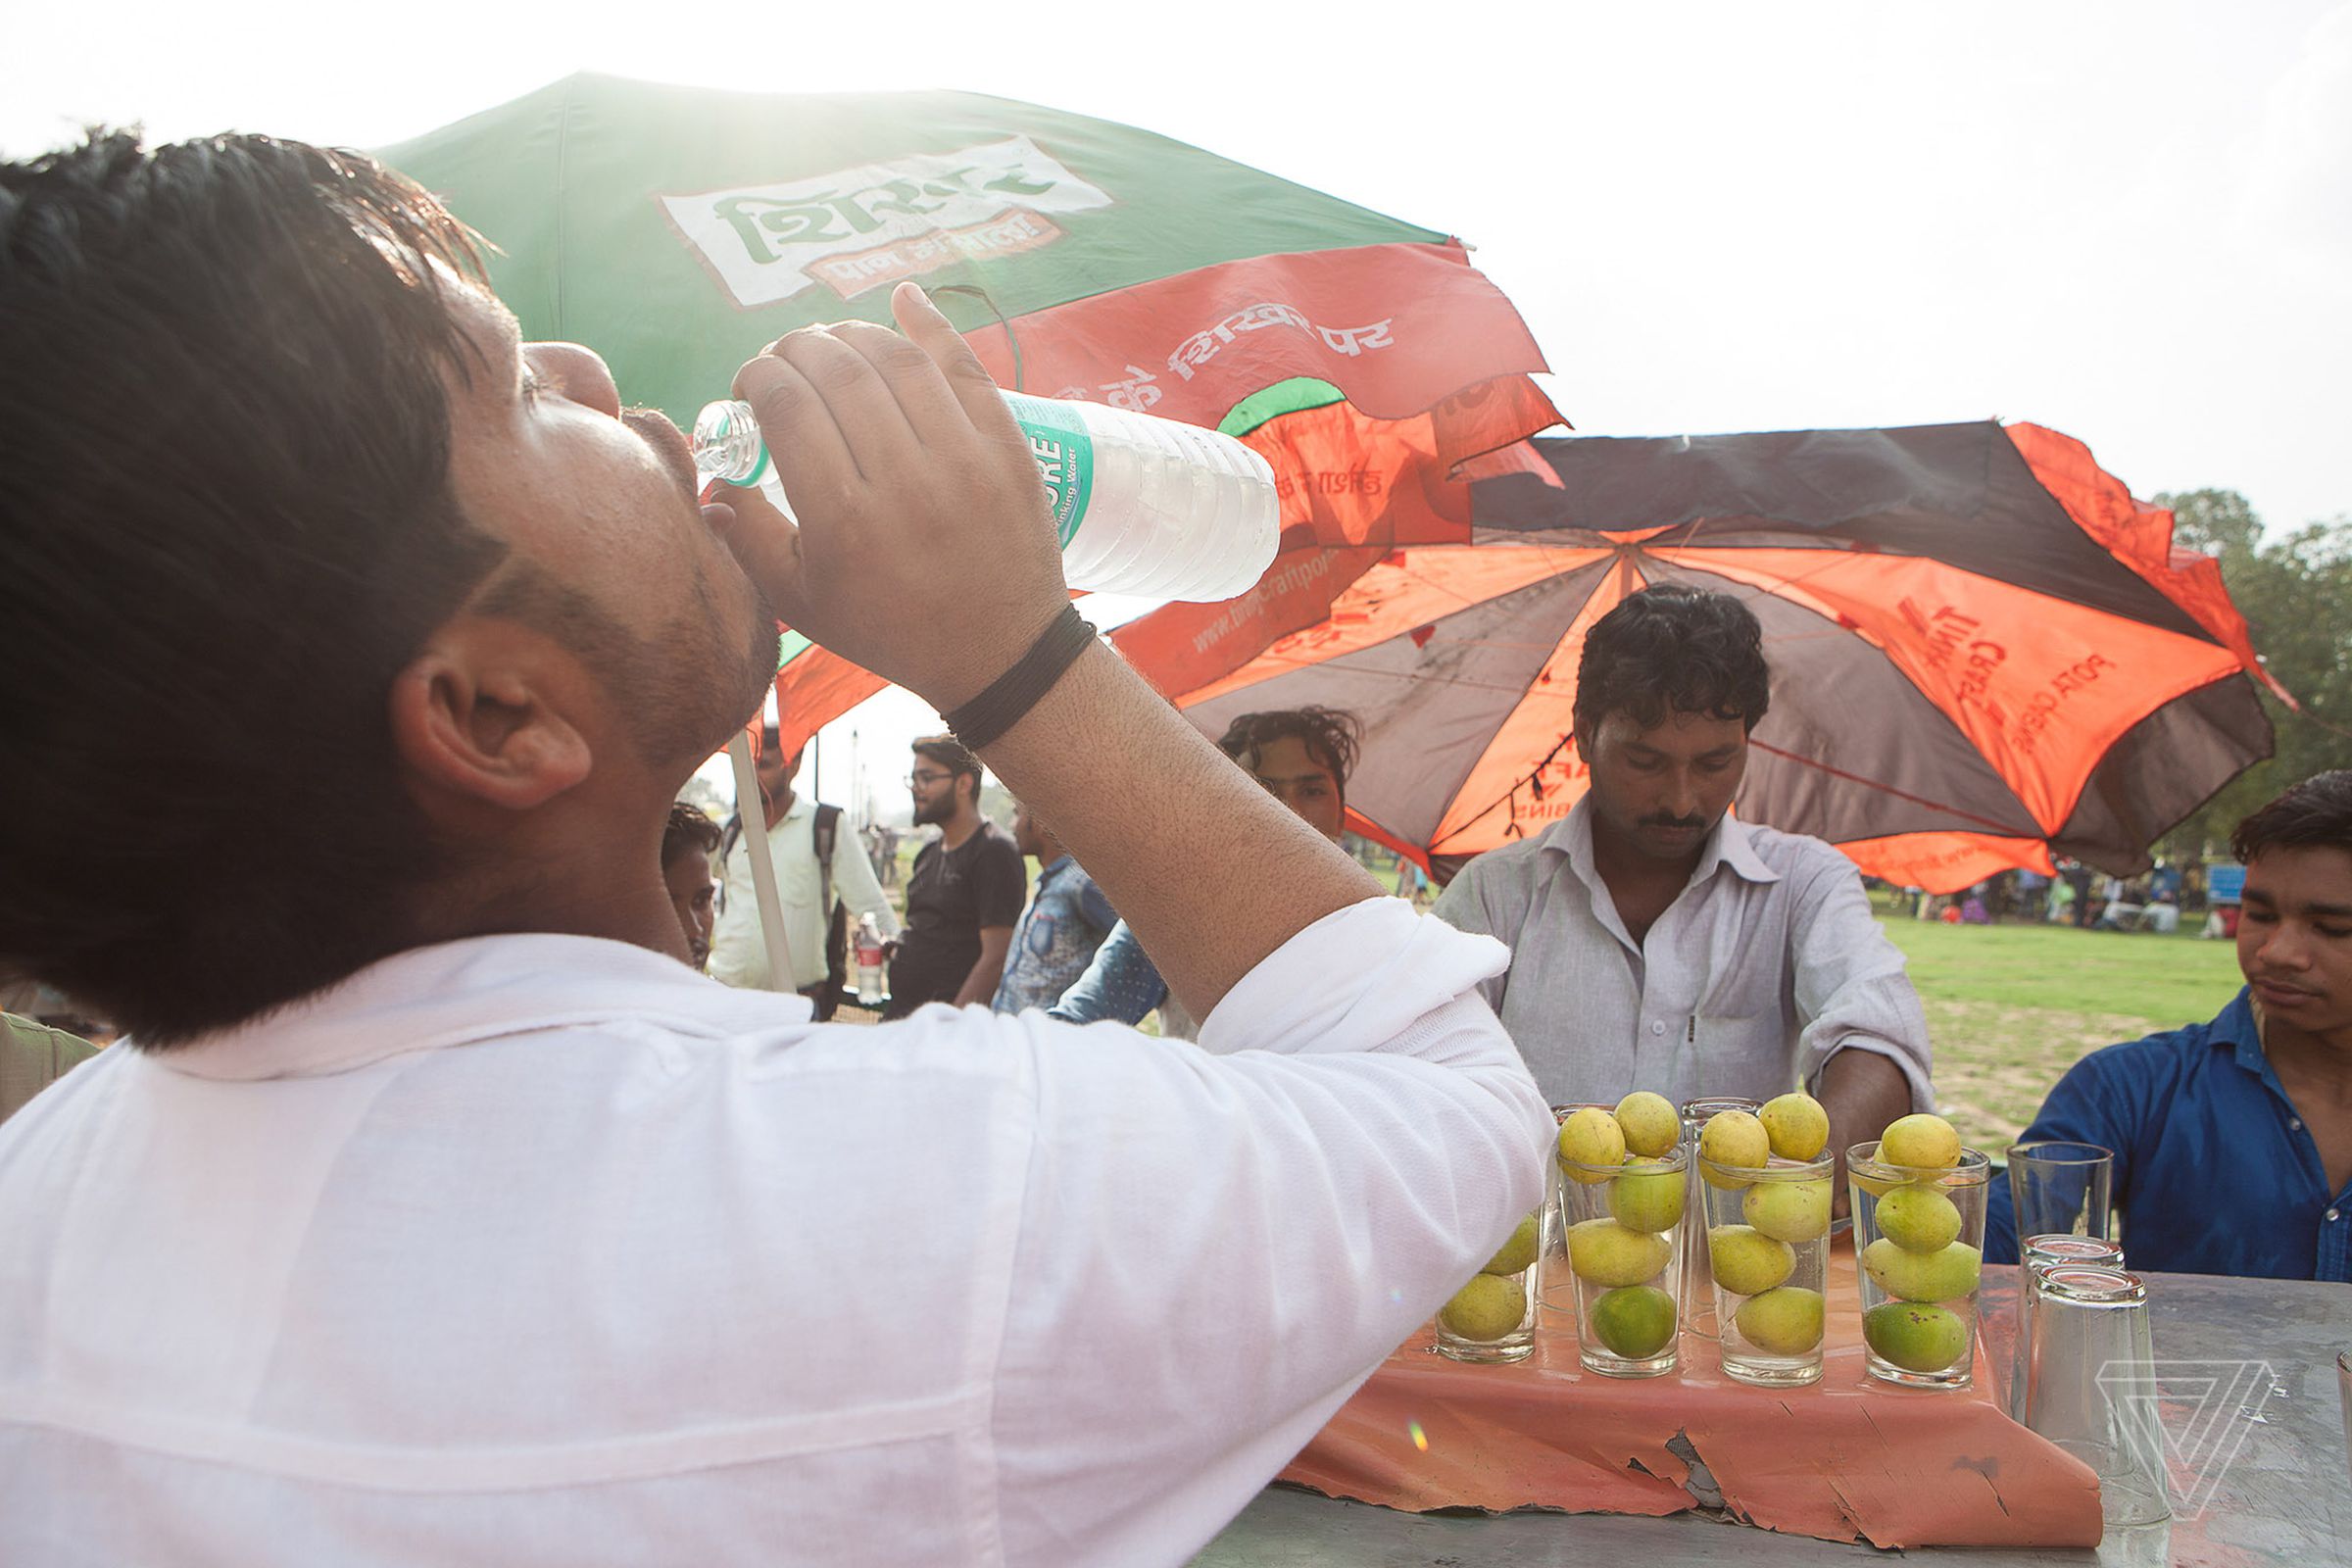 A drink vendor on a hot day in New Delhi.